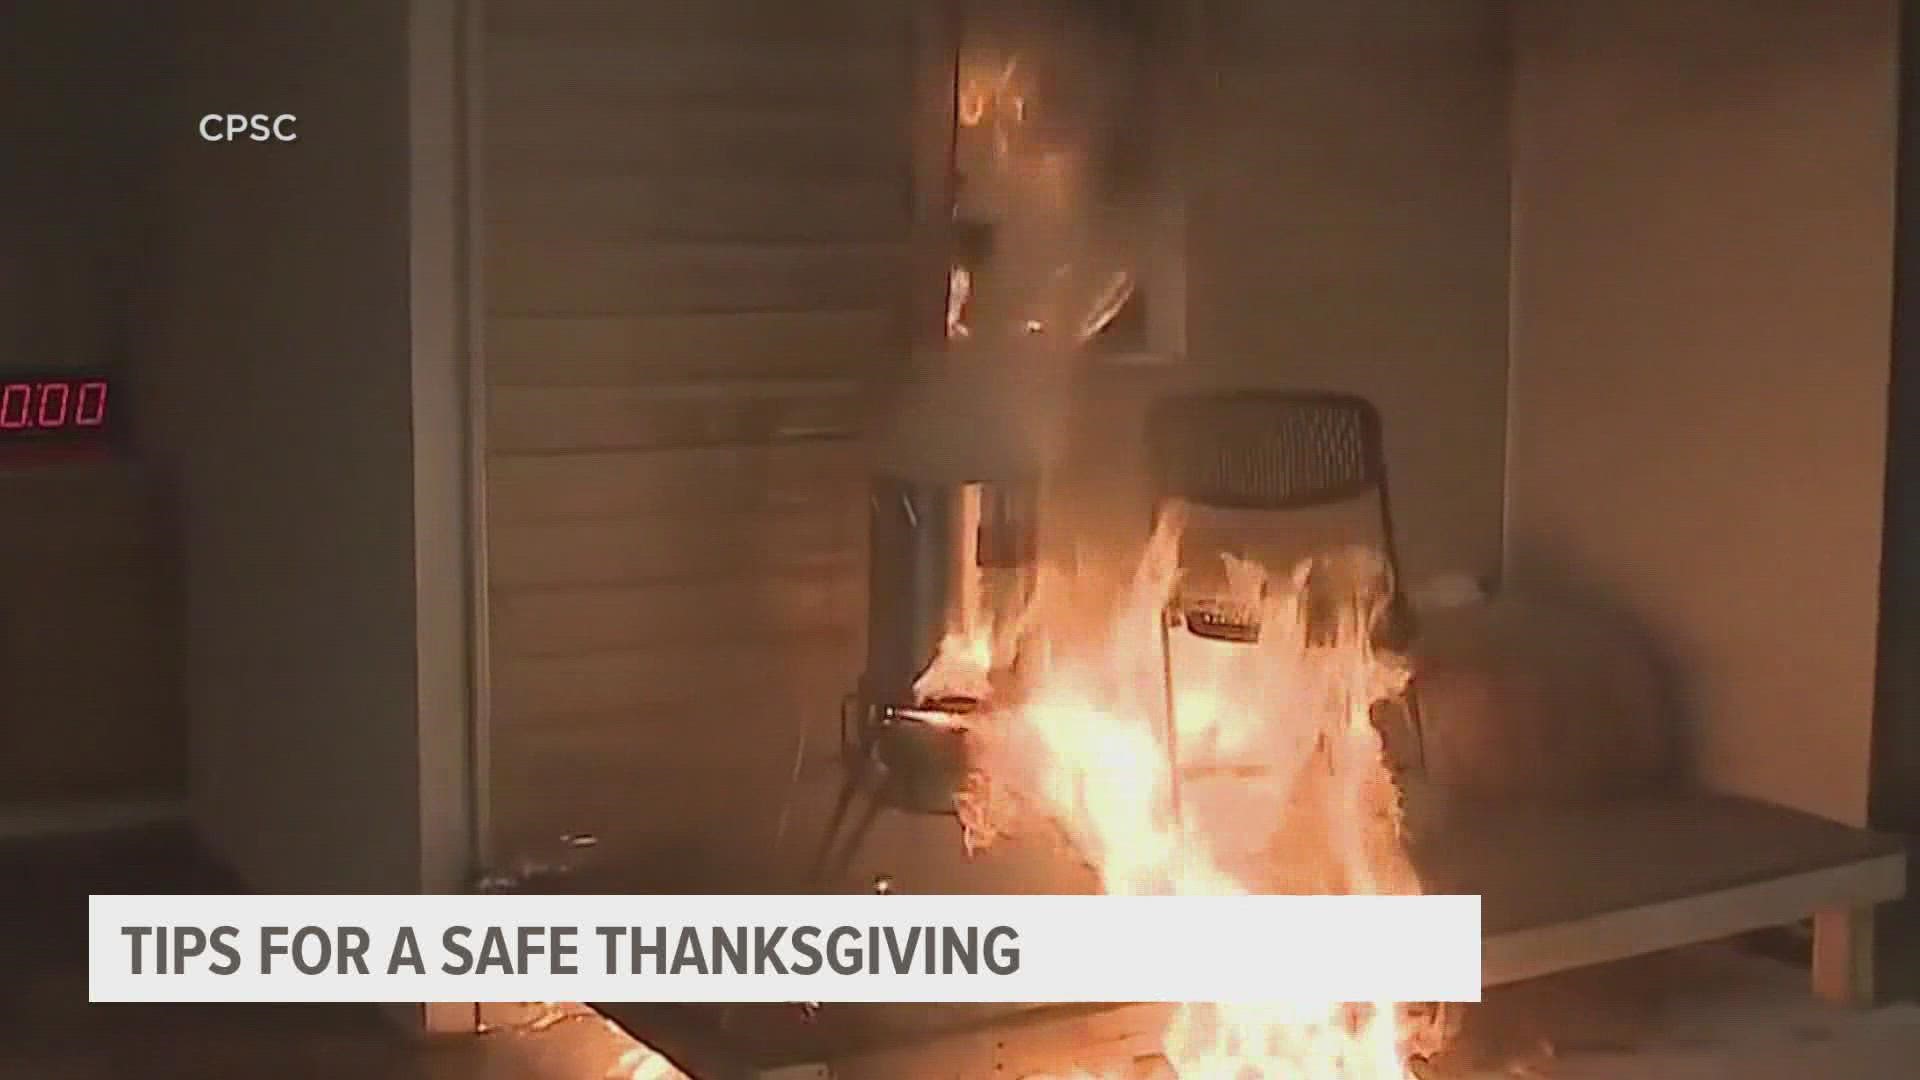 Des Moines Fire Marshal Jonathan Lund wants families to make sure they have an escape plan if a fire breaks out during Thanksgiving gatherings this year.